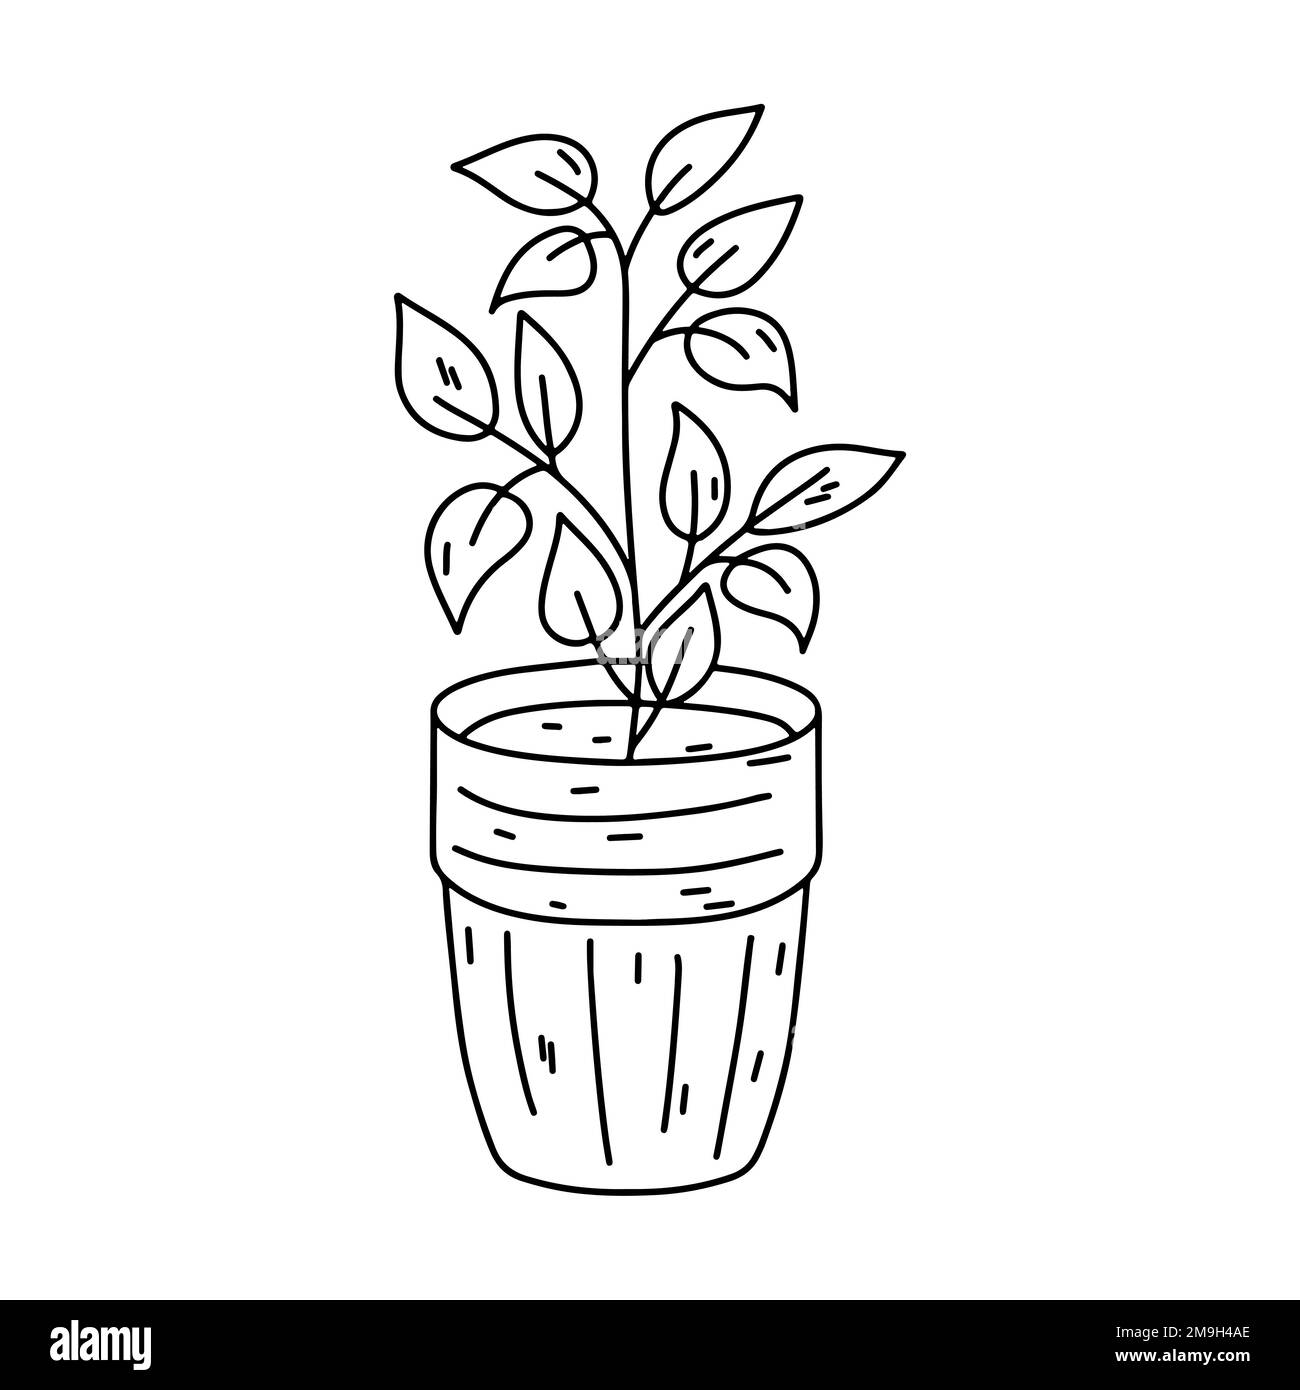 House plant in ceramic pot in hand drawn doodle style. Decorative potted house plant sketch illustration for print, web, mobile and infographics isola Stock Vector